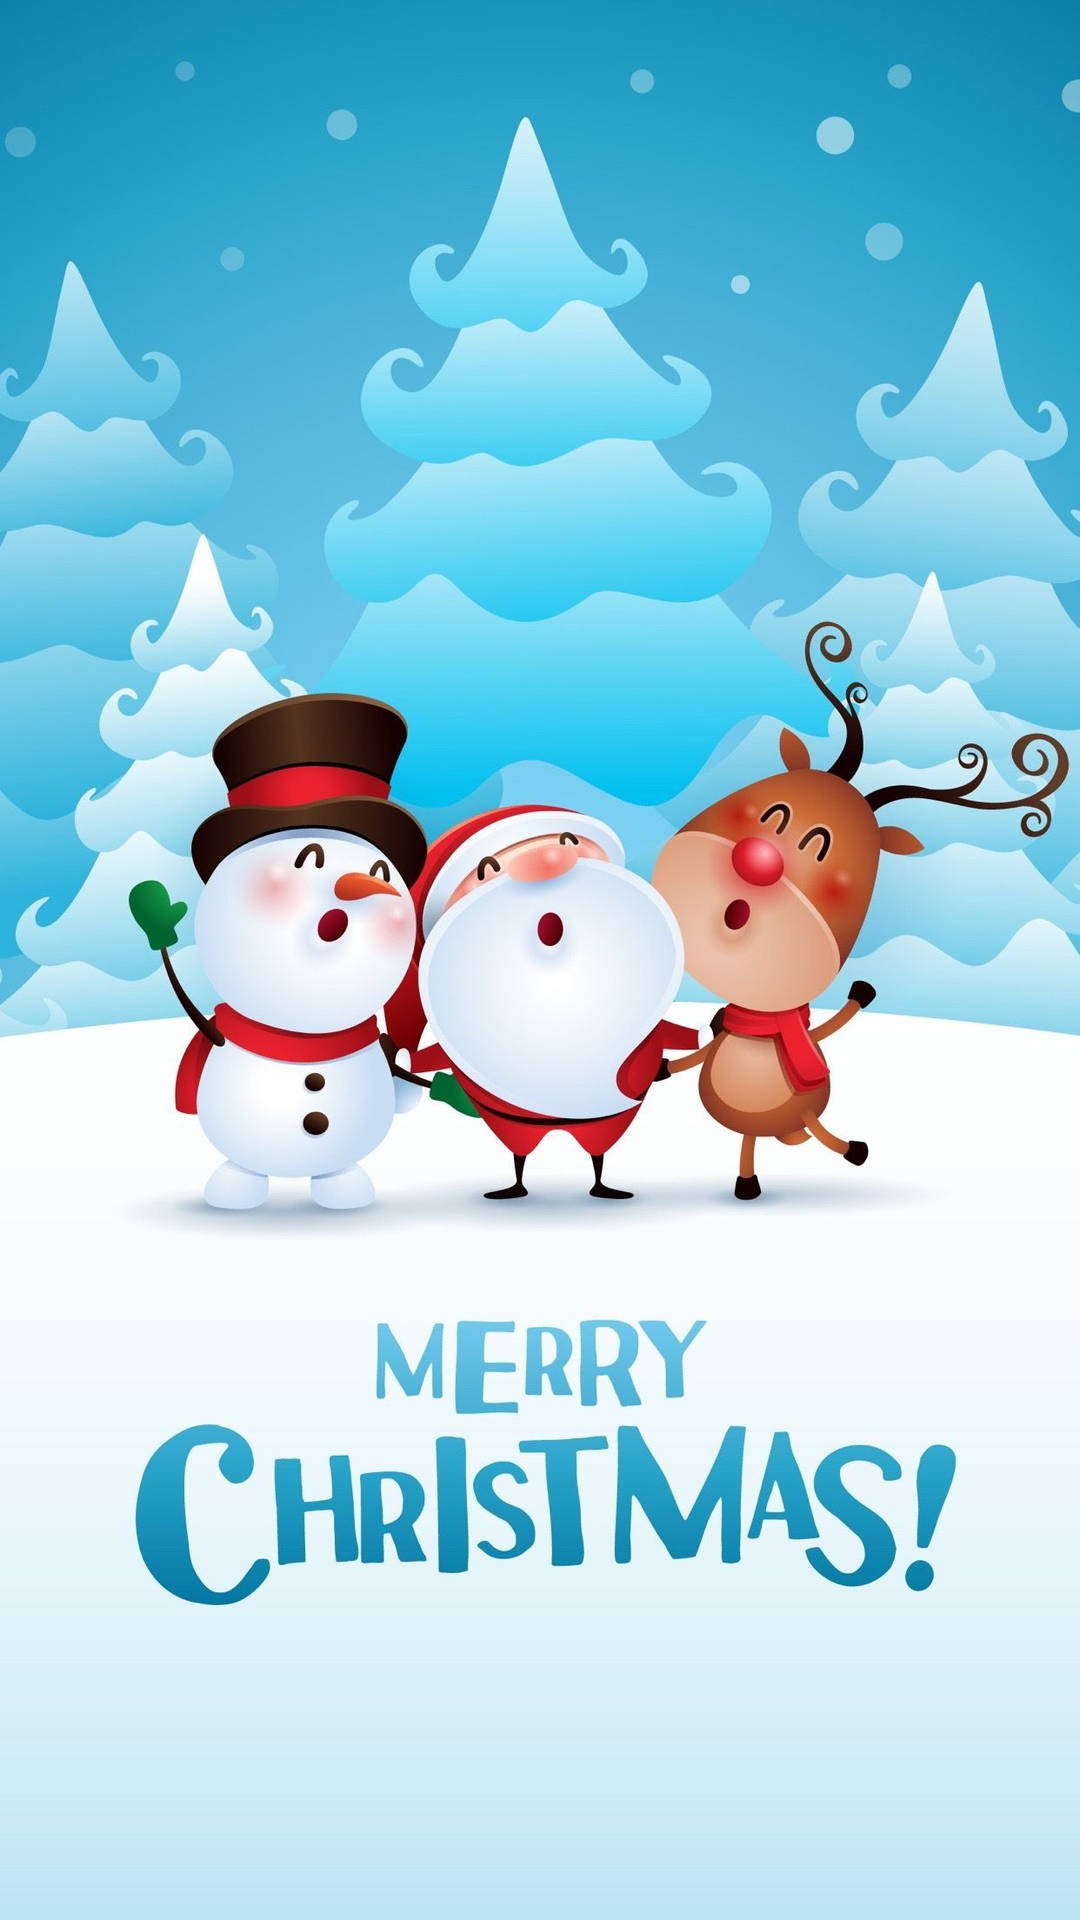 Christmas Gifts from Santa Wallpaper - iPhone, Android & Desktop Backgrounds-mncb.edu.vn